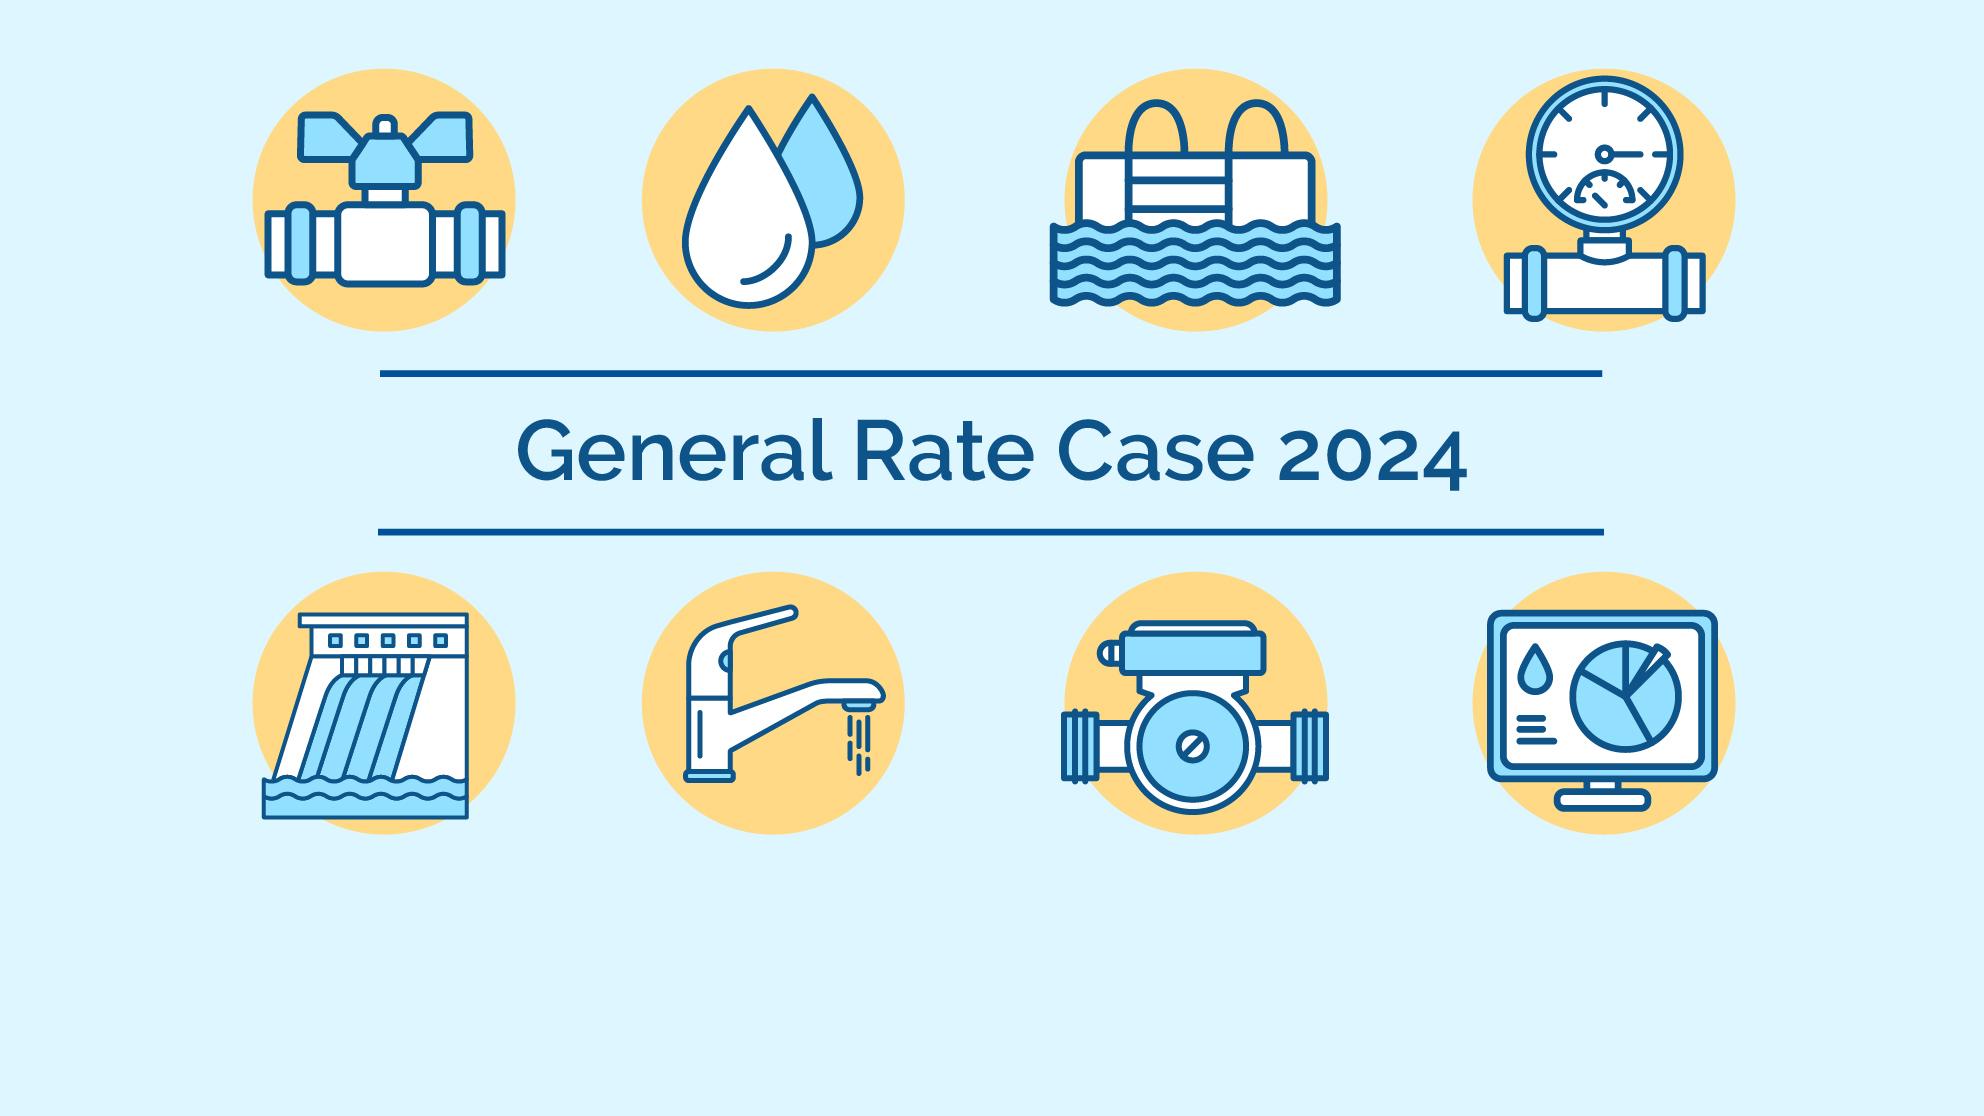 General Rate Case 2024